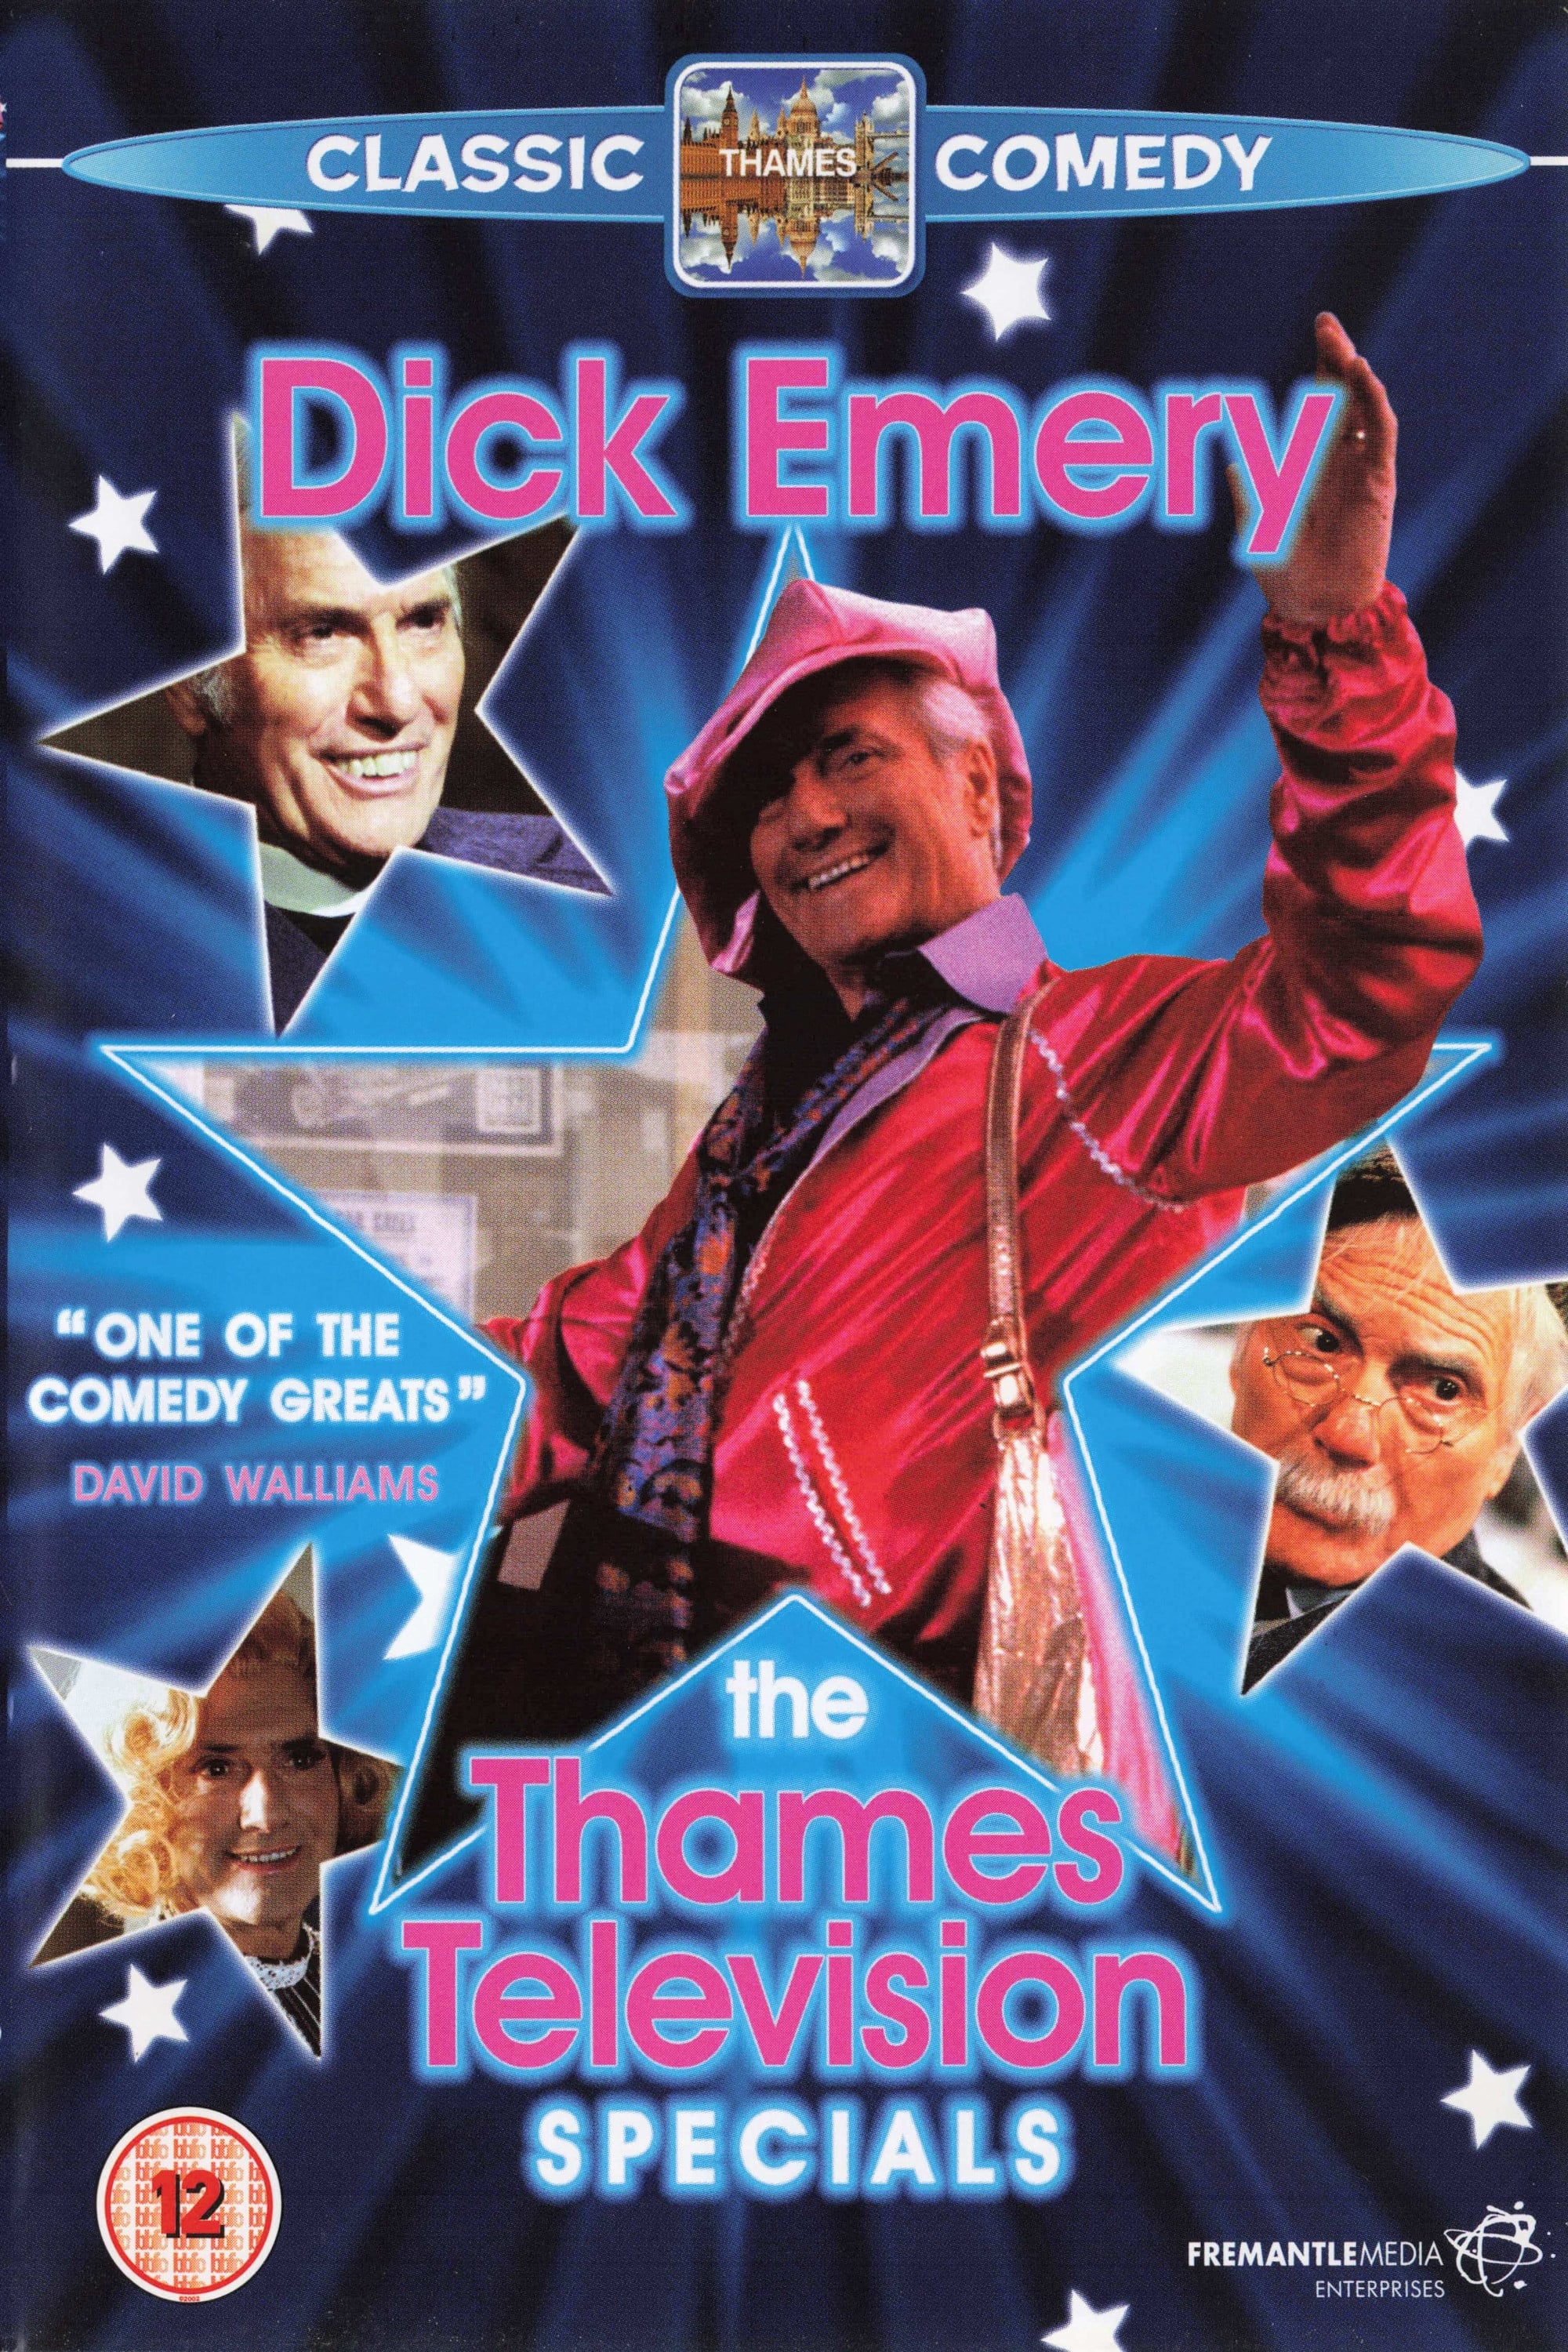 Dick Emery - The Thames Television Specials